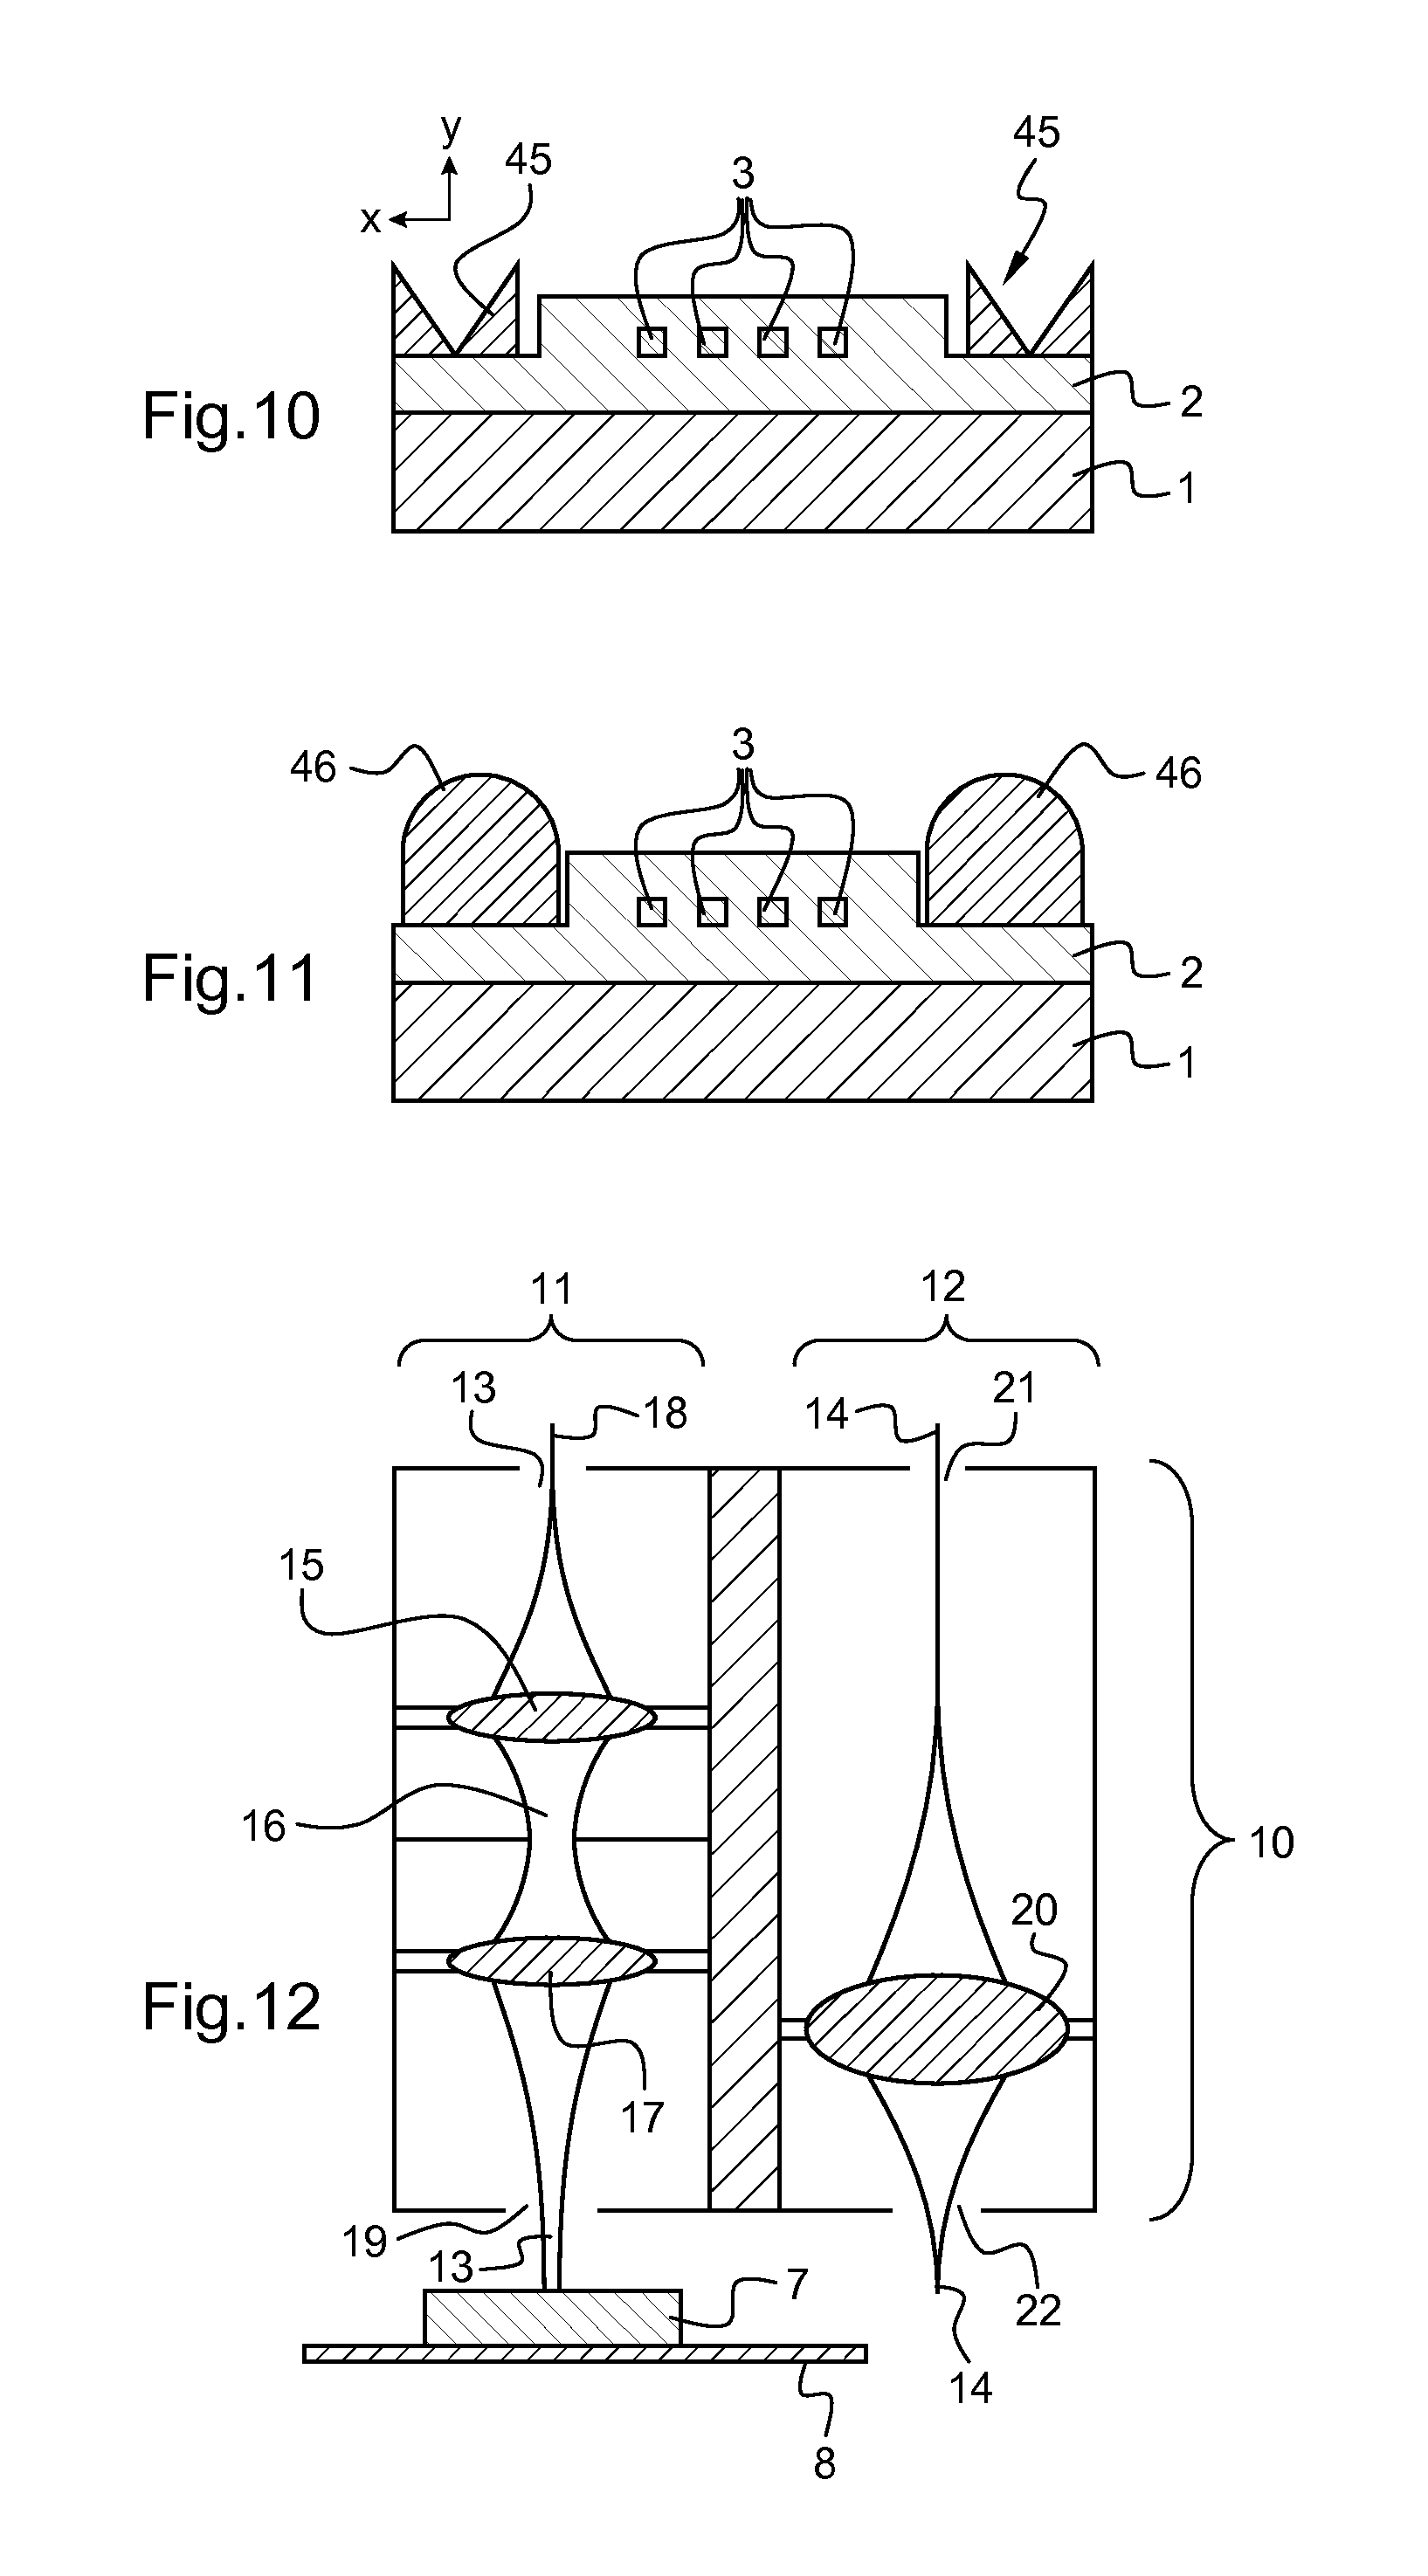 Method of manufacturing a three dimensional photonic device by two photon absorption polymerization